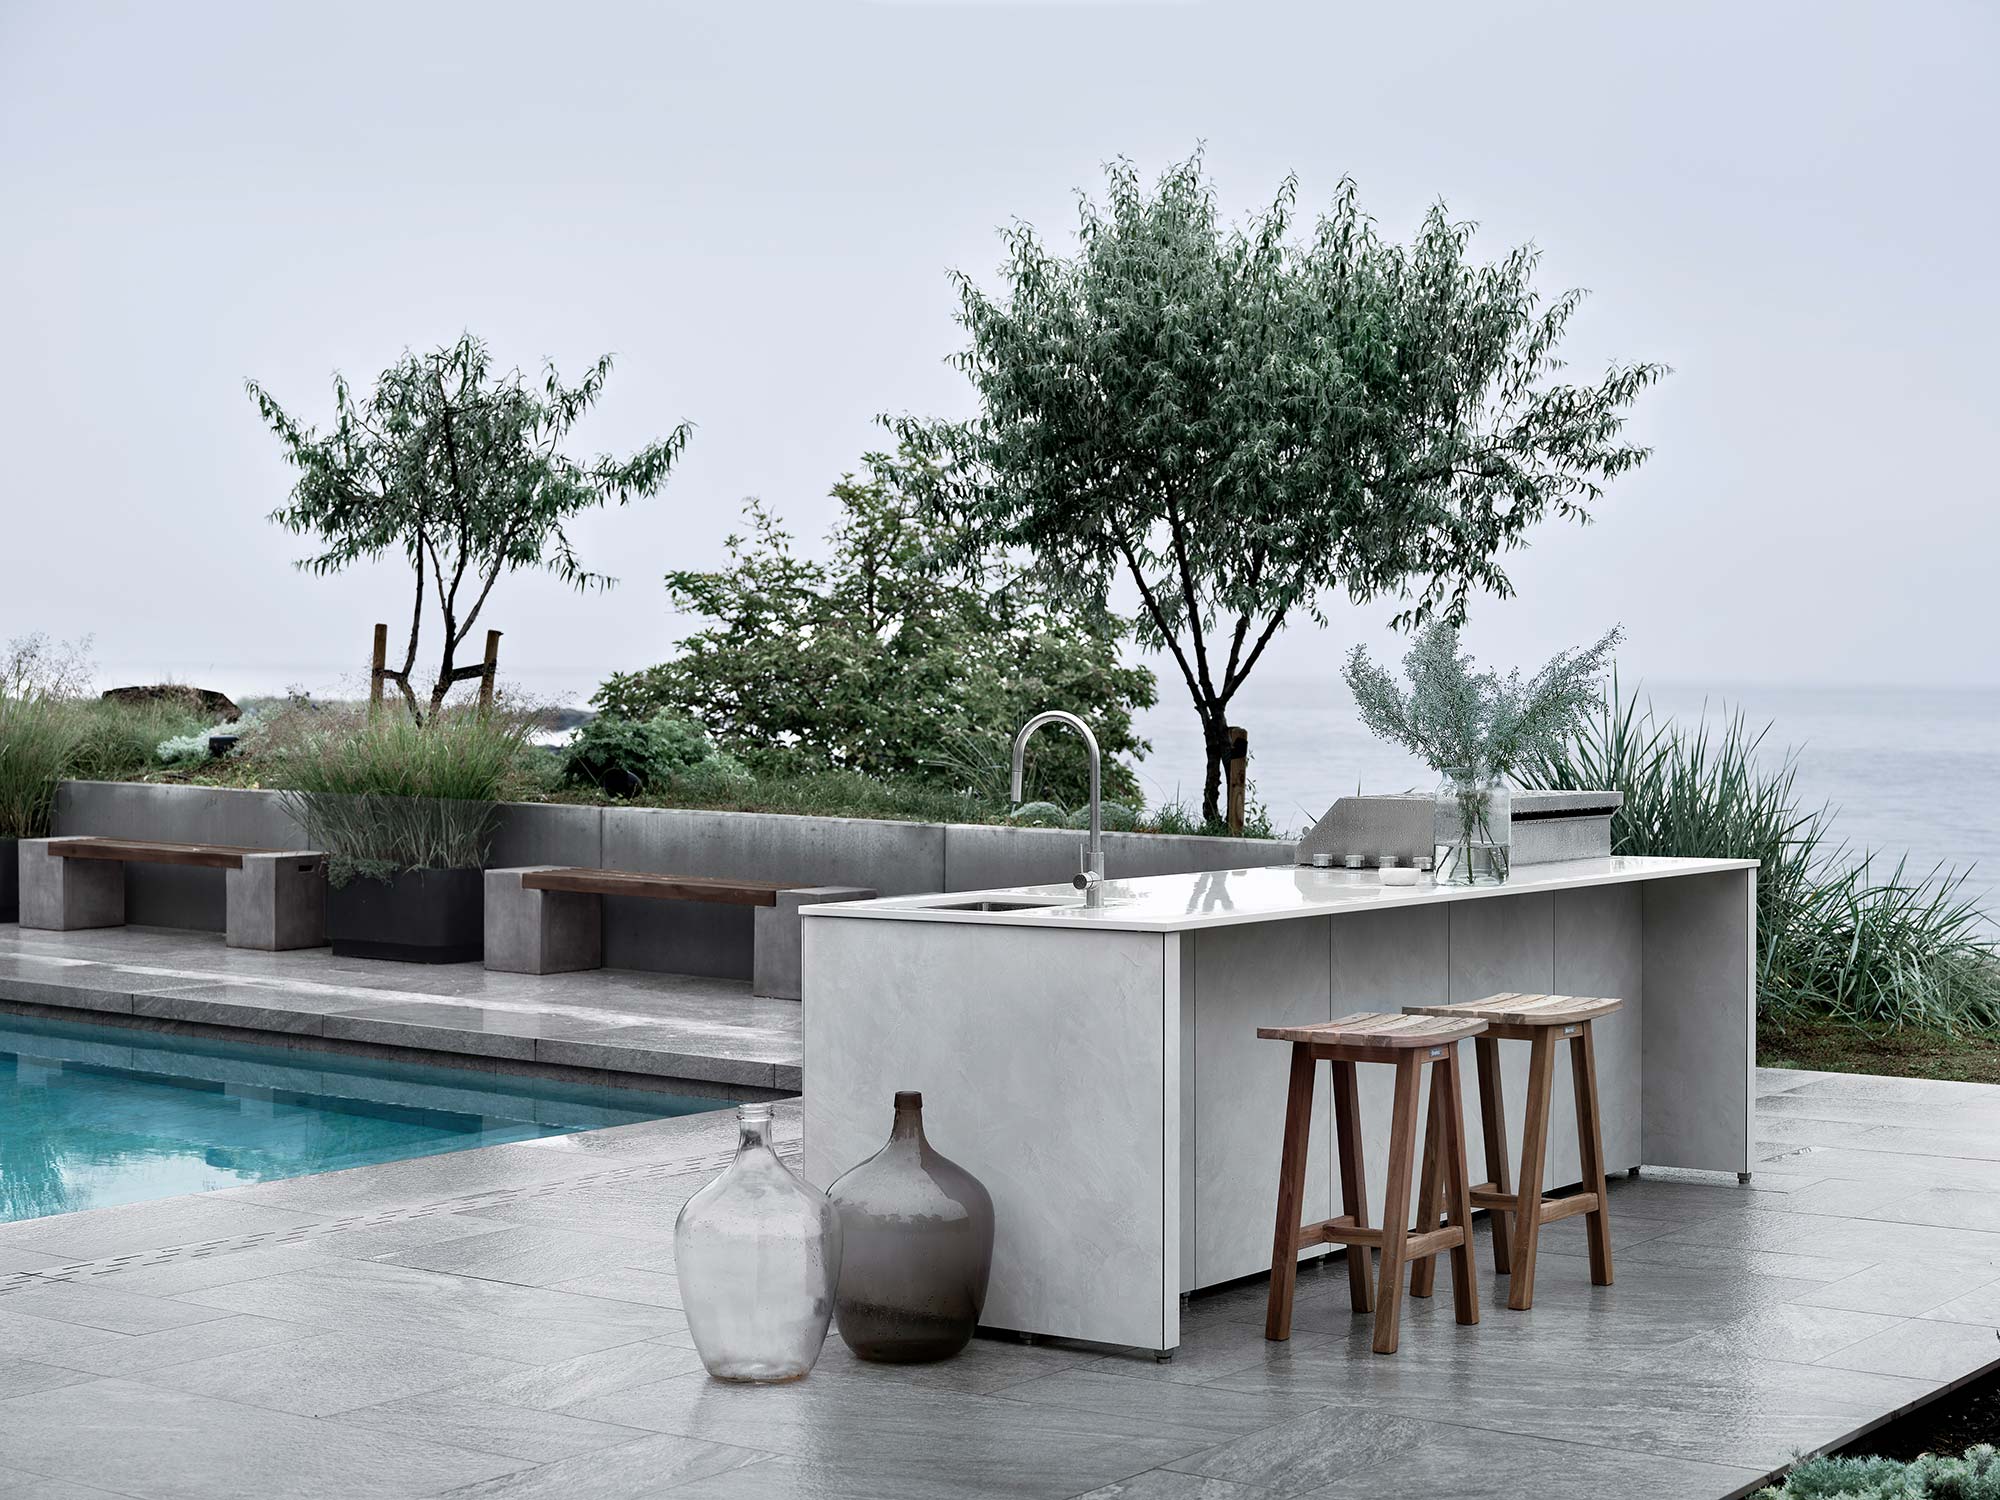 Image of Ballingslov Outdoor kitchen 12 in Outdoor kitchens for a luxury garden - Cosentino